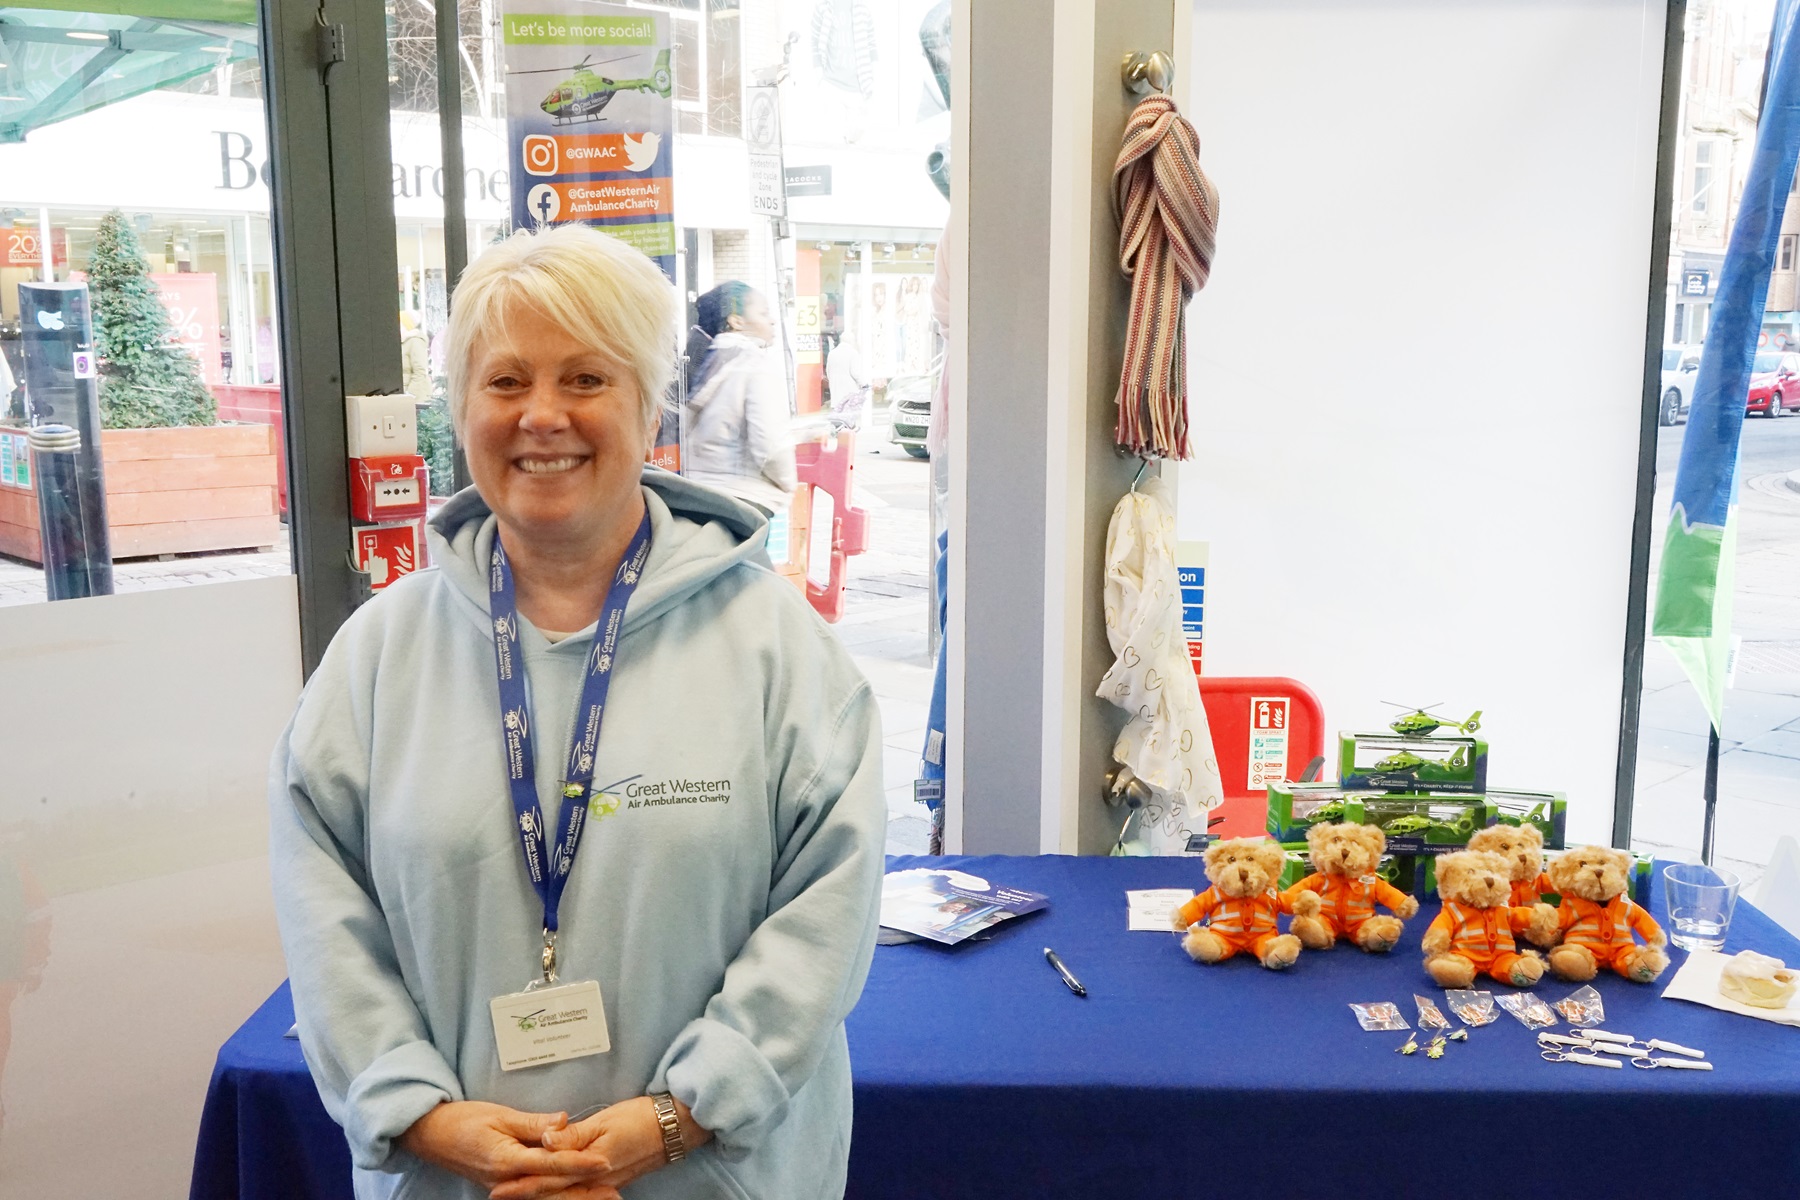 A retail volunteer at the Gloucester shop launch